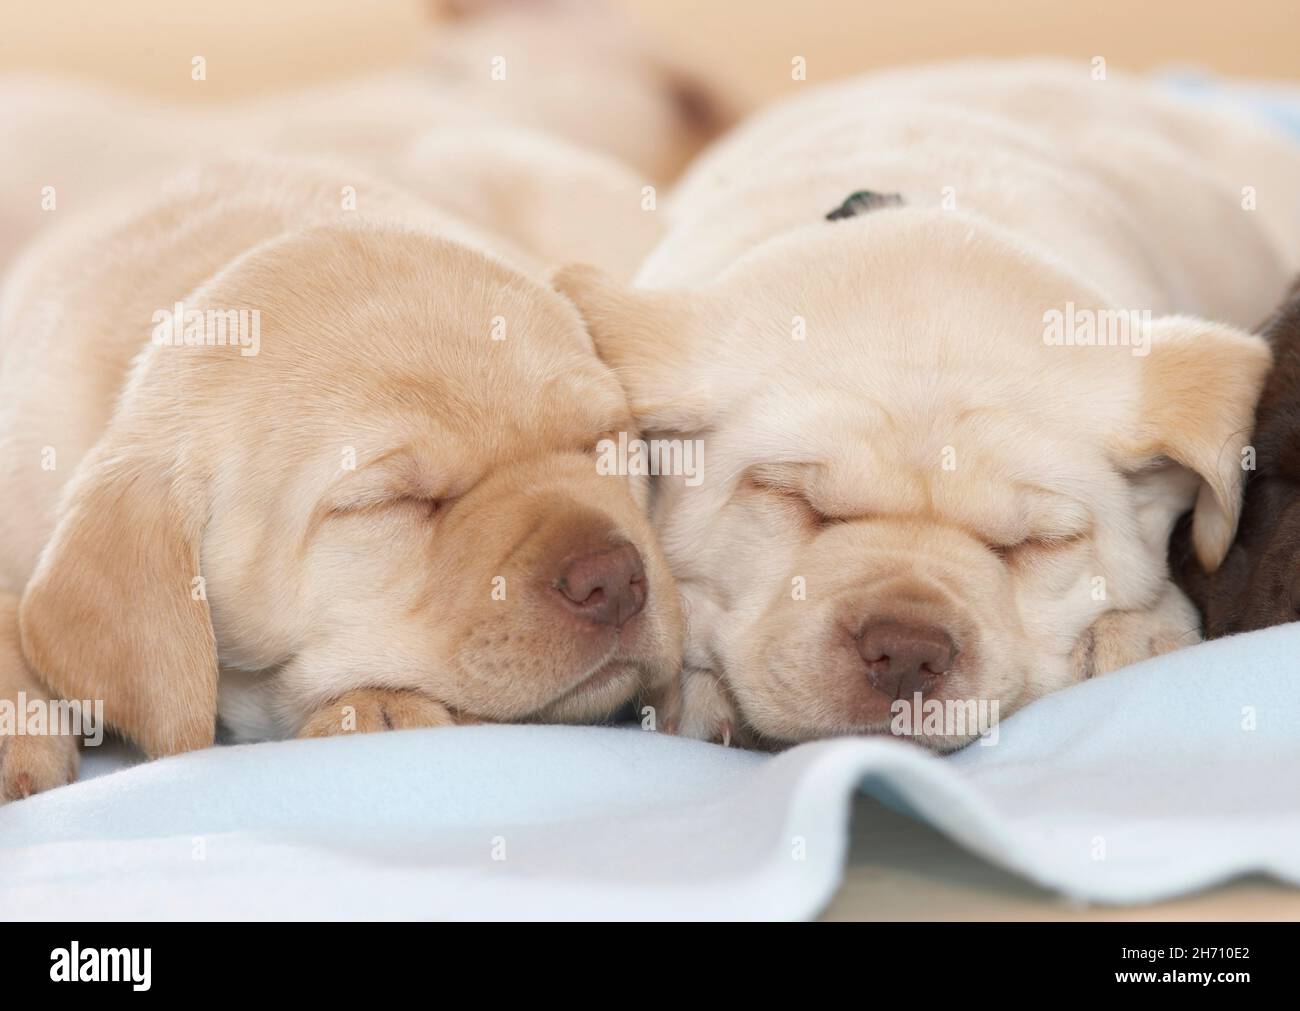 Labrador Retriever. Two puppies sleeping on a blanket. Germany Stock Photo